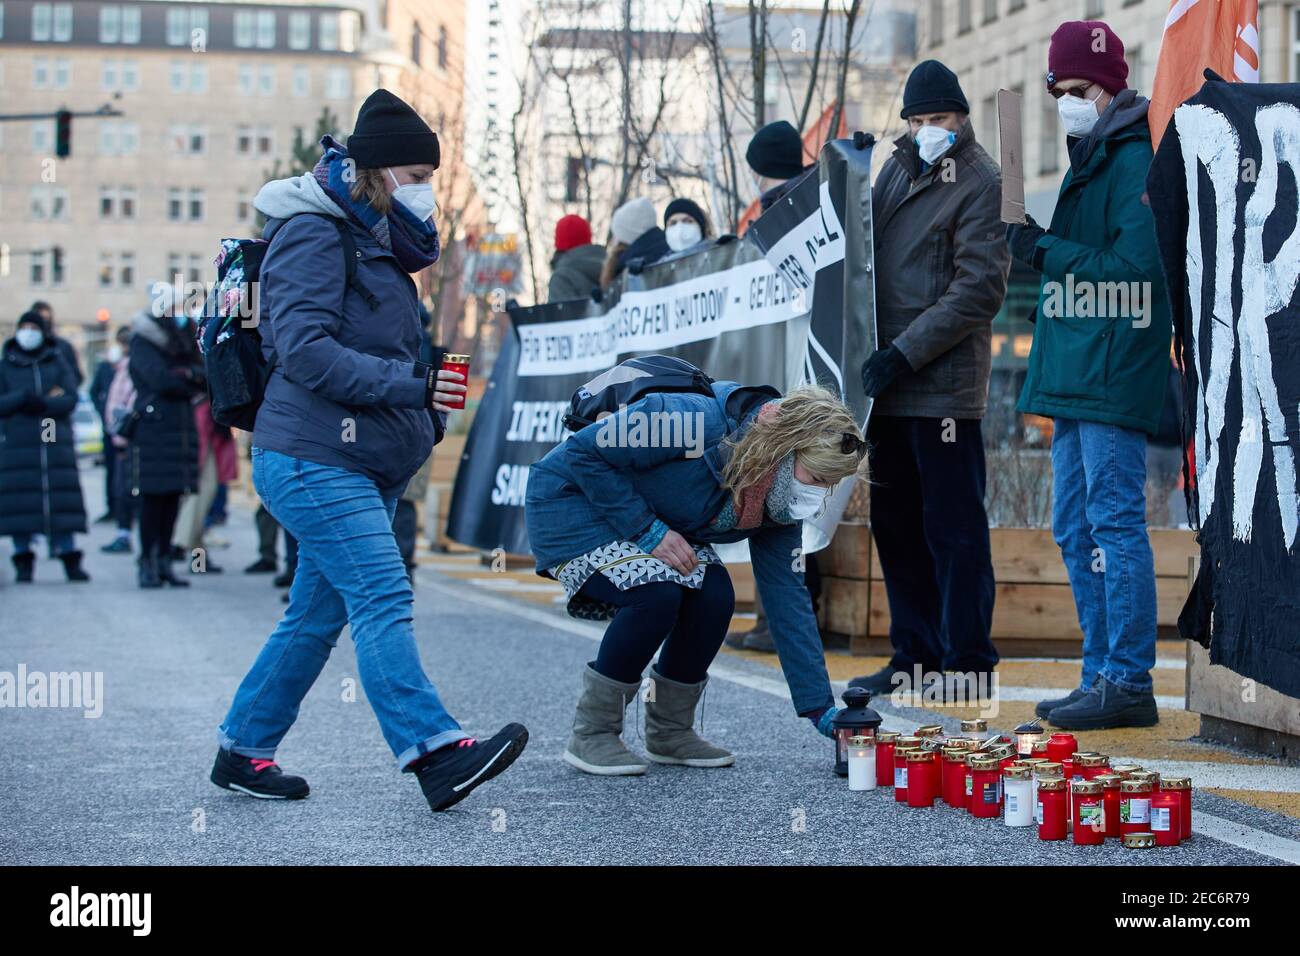 Hamburg, Germany. 13th Feb, 2021. Two women place devotional candles during a demonstration on the Jungfernstieg. More than 200 people demonstrated for accommodation of homeless people in hotels. Credit: Georg Wendt/dpa/Alamy Live News Stock Photo